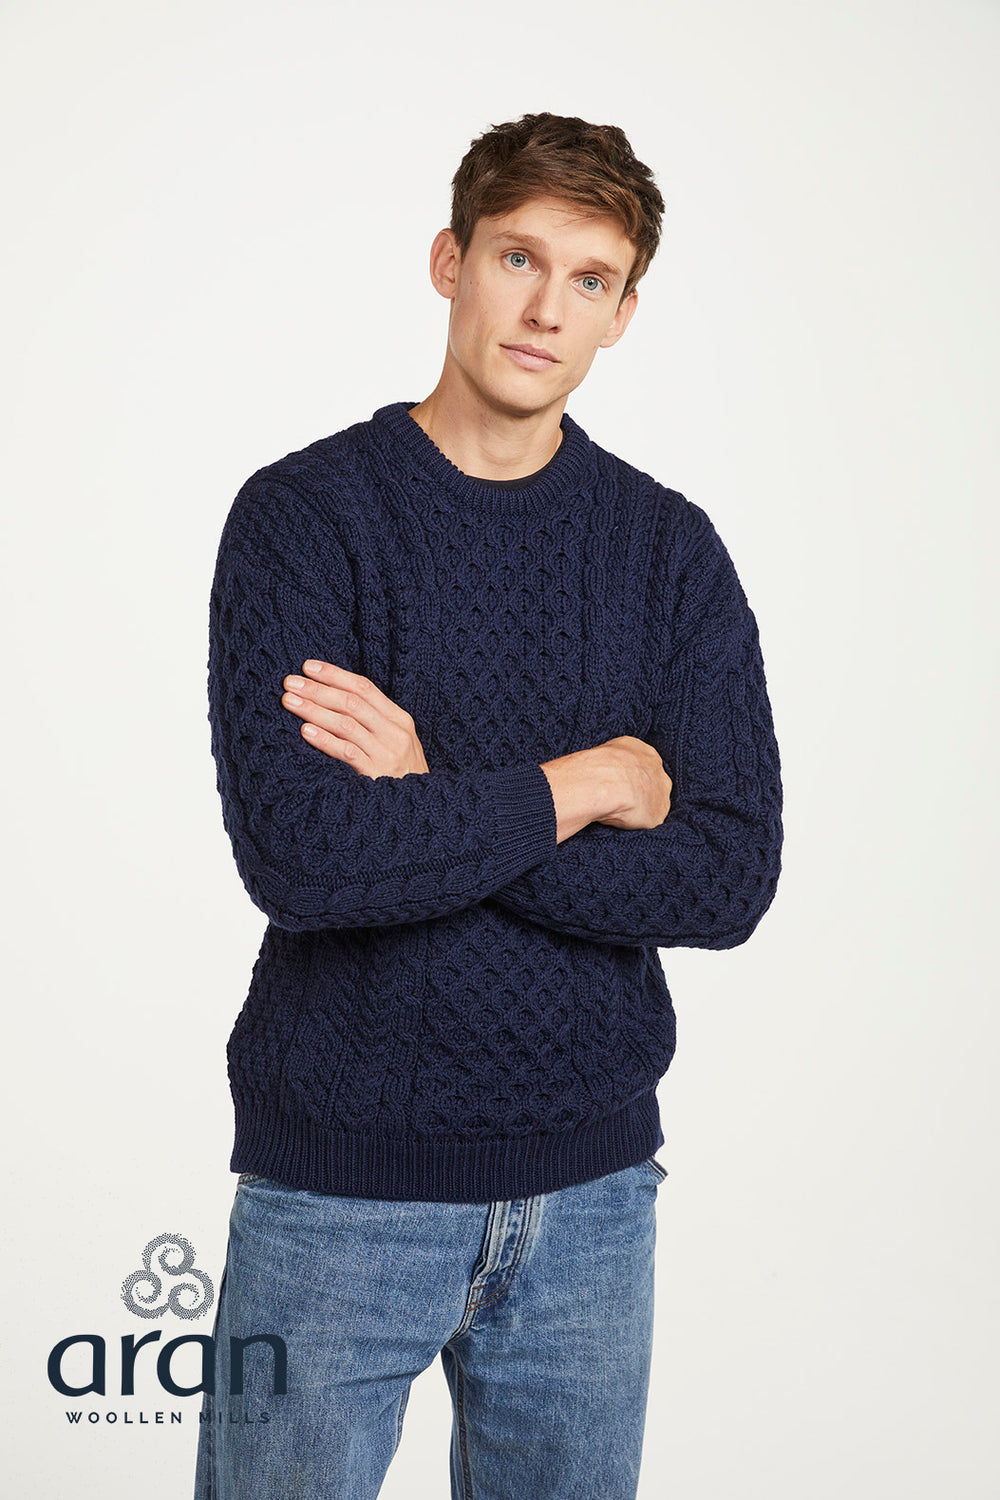 Aran Wool Merino Traditional Pullover Sweater Navy (A823 161)